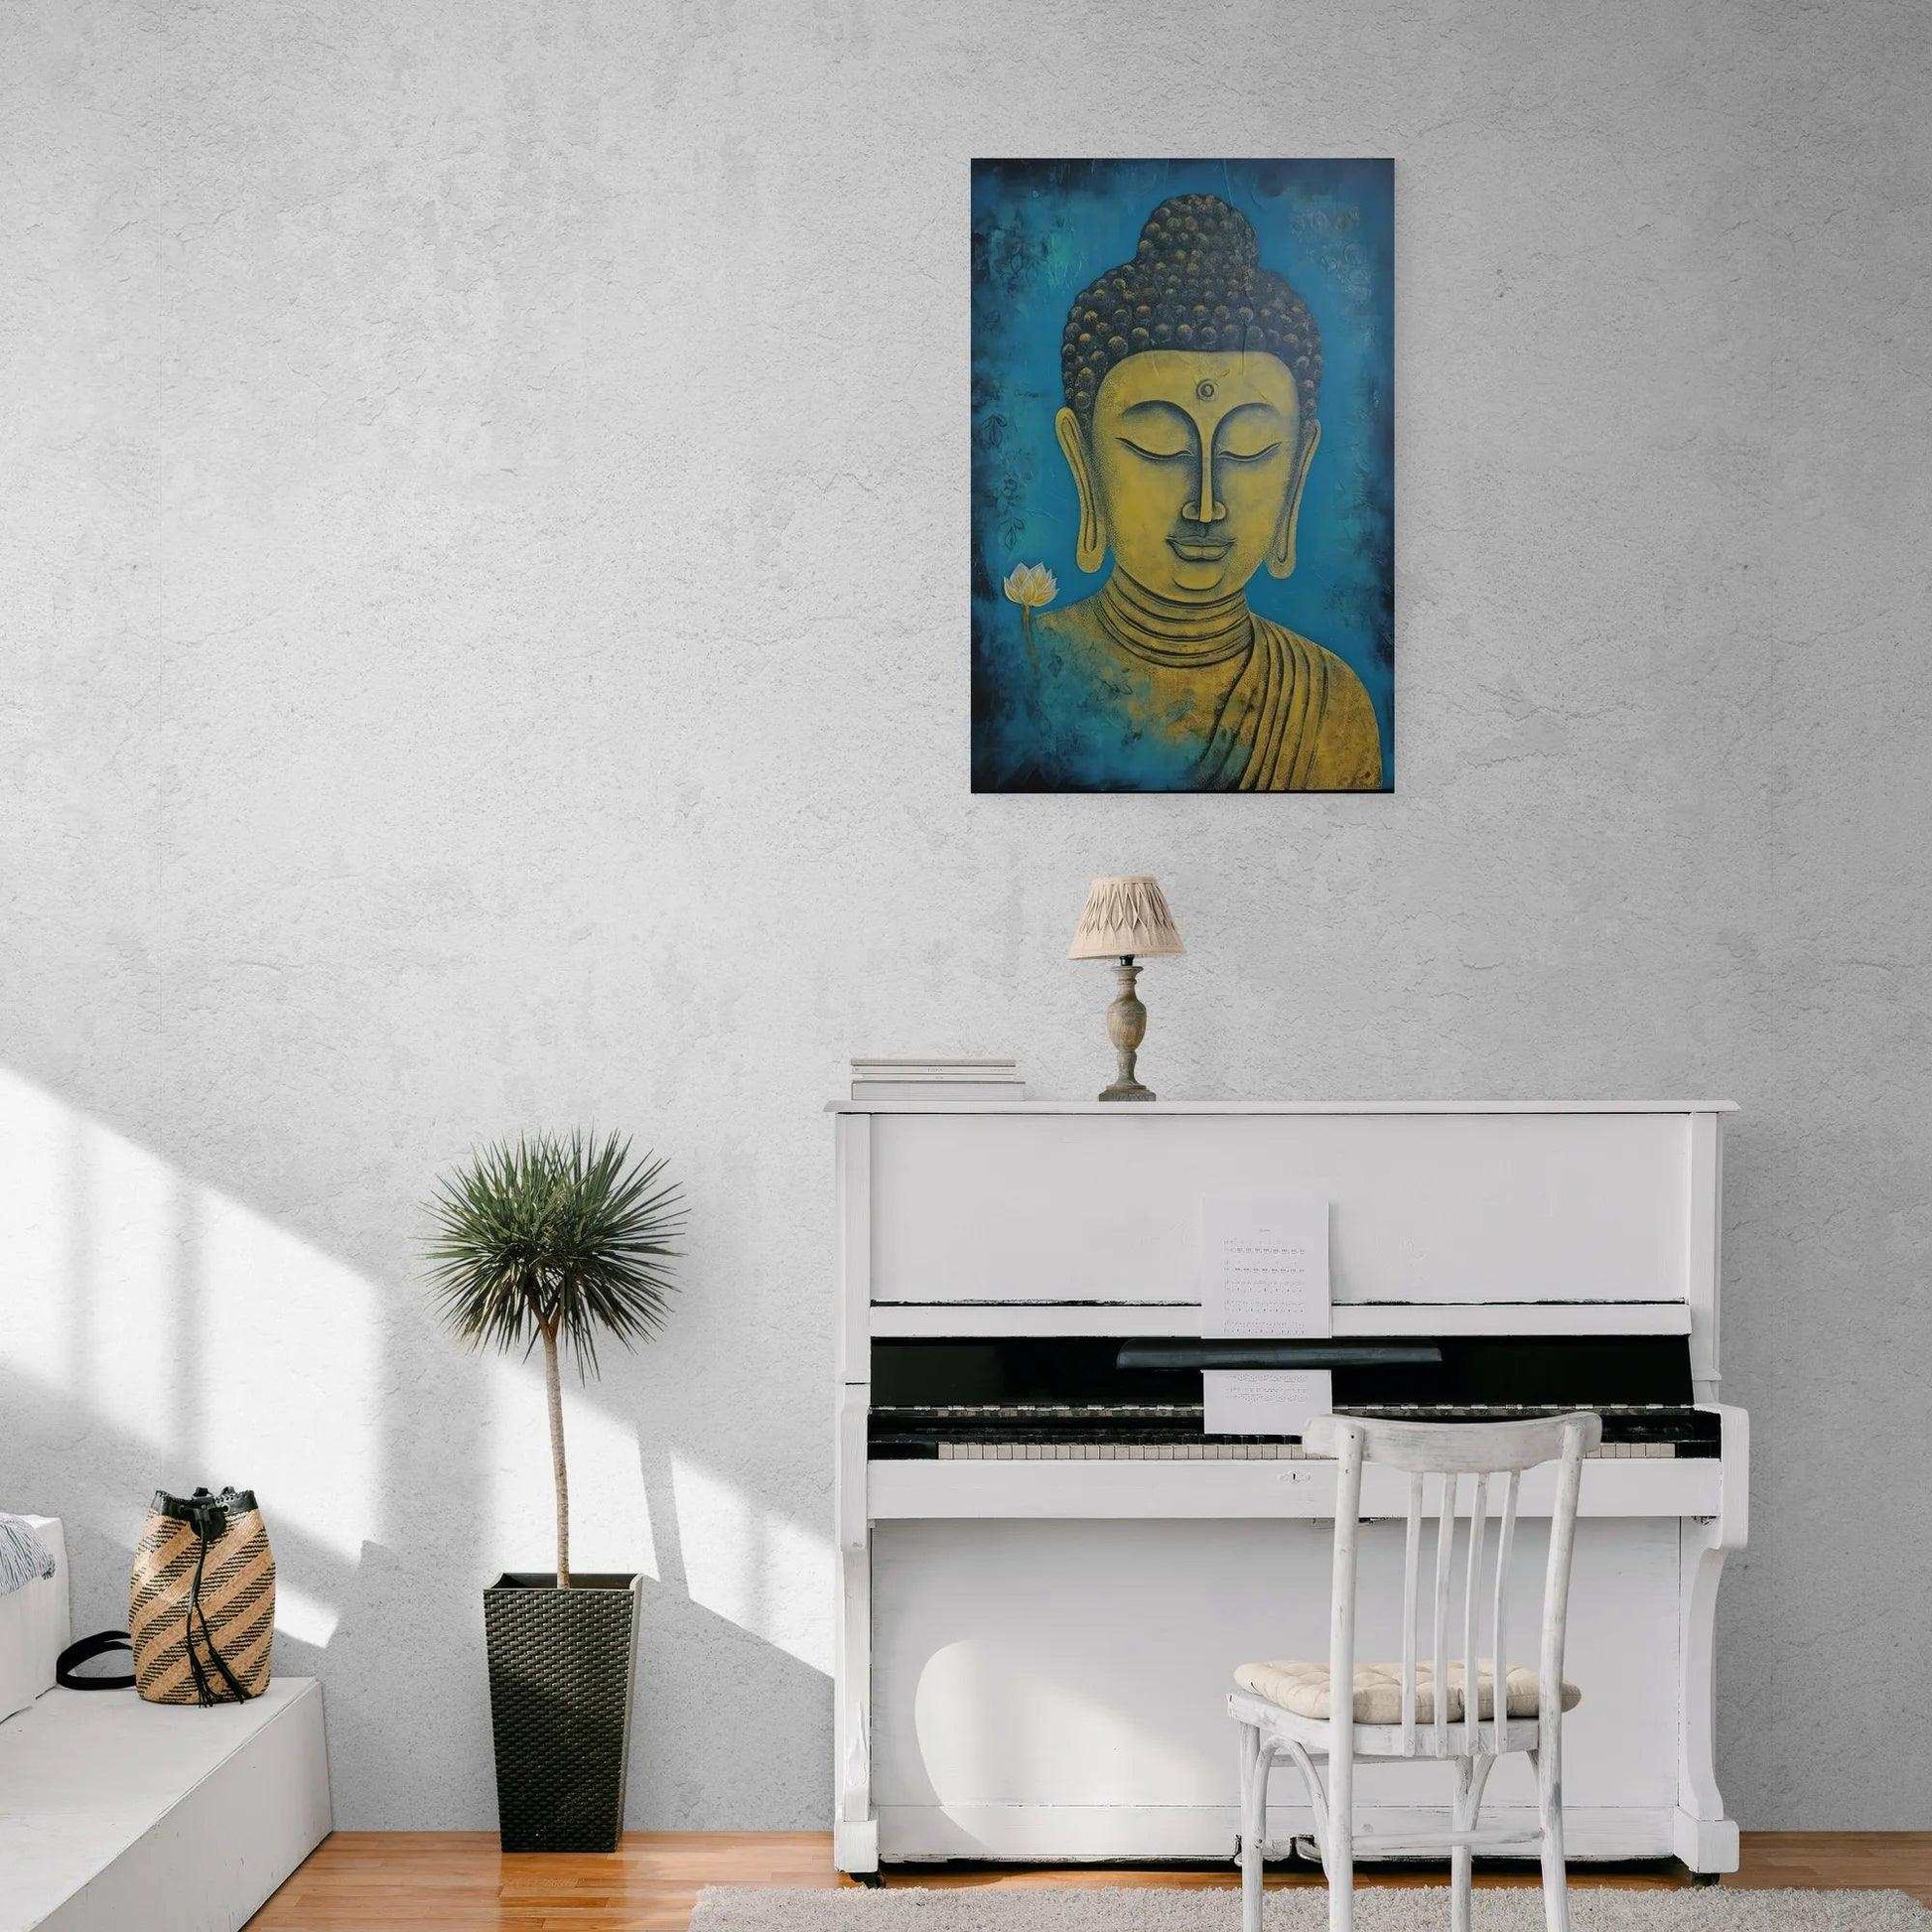 A serene blue and golden Buddha painting hung on a white textured wall above a white piano, flanked by a classic white chair, a wicker plant pot with a lush palm, and a lamp, contributing to a peaceful and creative atmosphere.